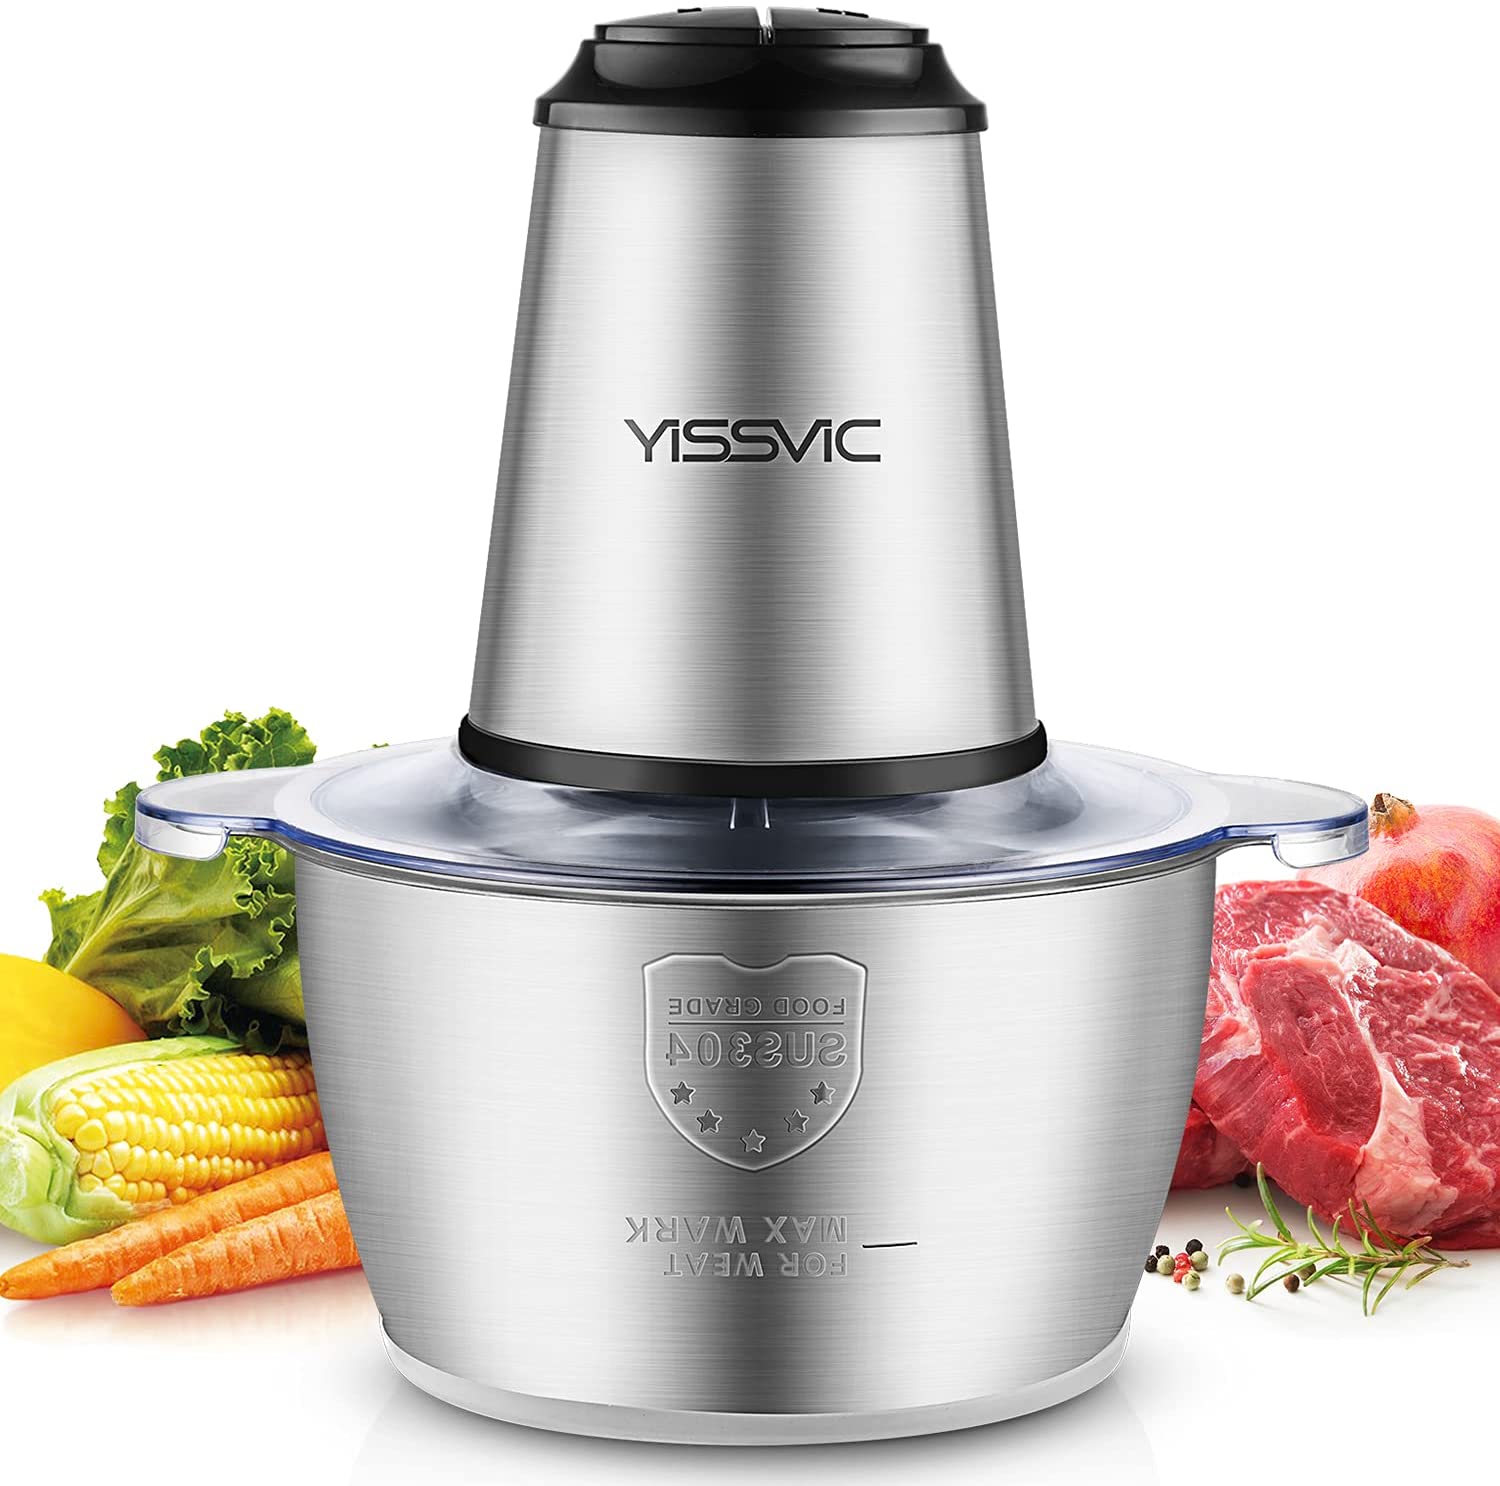 YISSVIC Universal Chopper 1.5 L 300 W Electric Multi-Chopper with 2 Speed Levels 4 Stainless Steel Blades